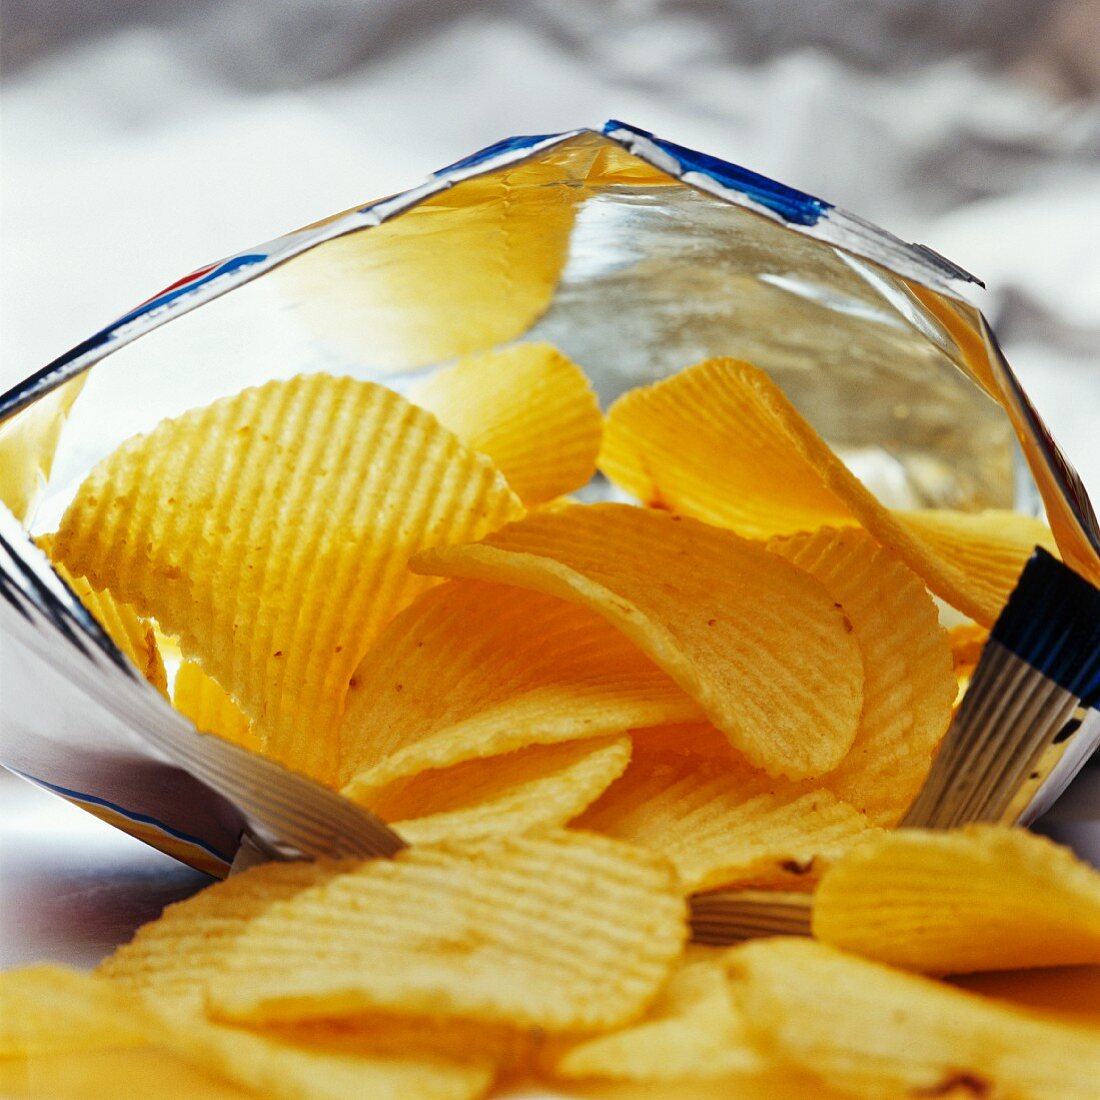 Ribbed potato chips packaged in a foil bag